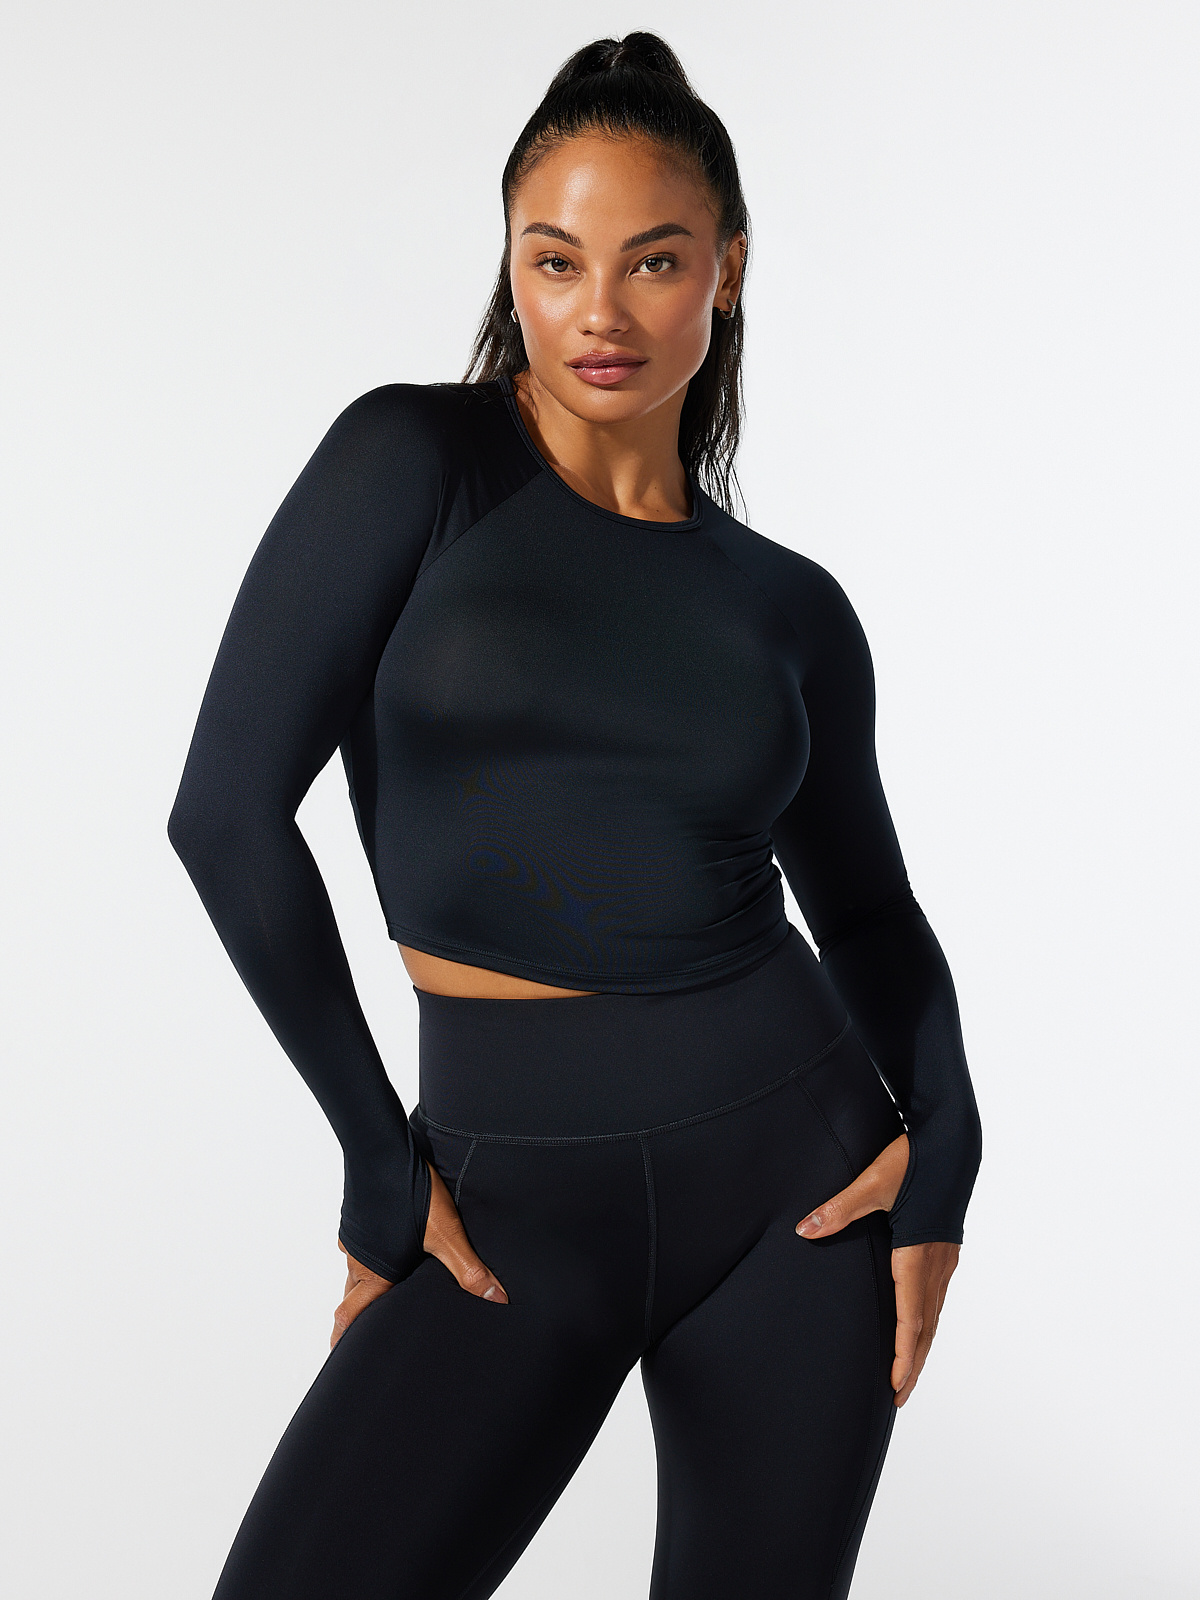 Lace Up Open-Back Long-Sleeve Top in Black | SAVAGE X FENTY